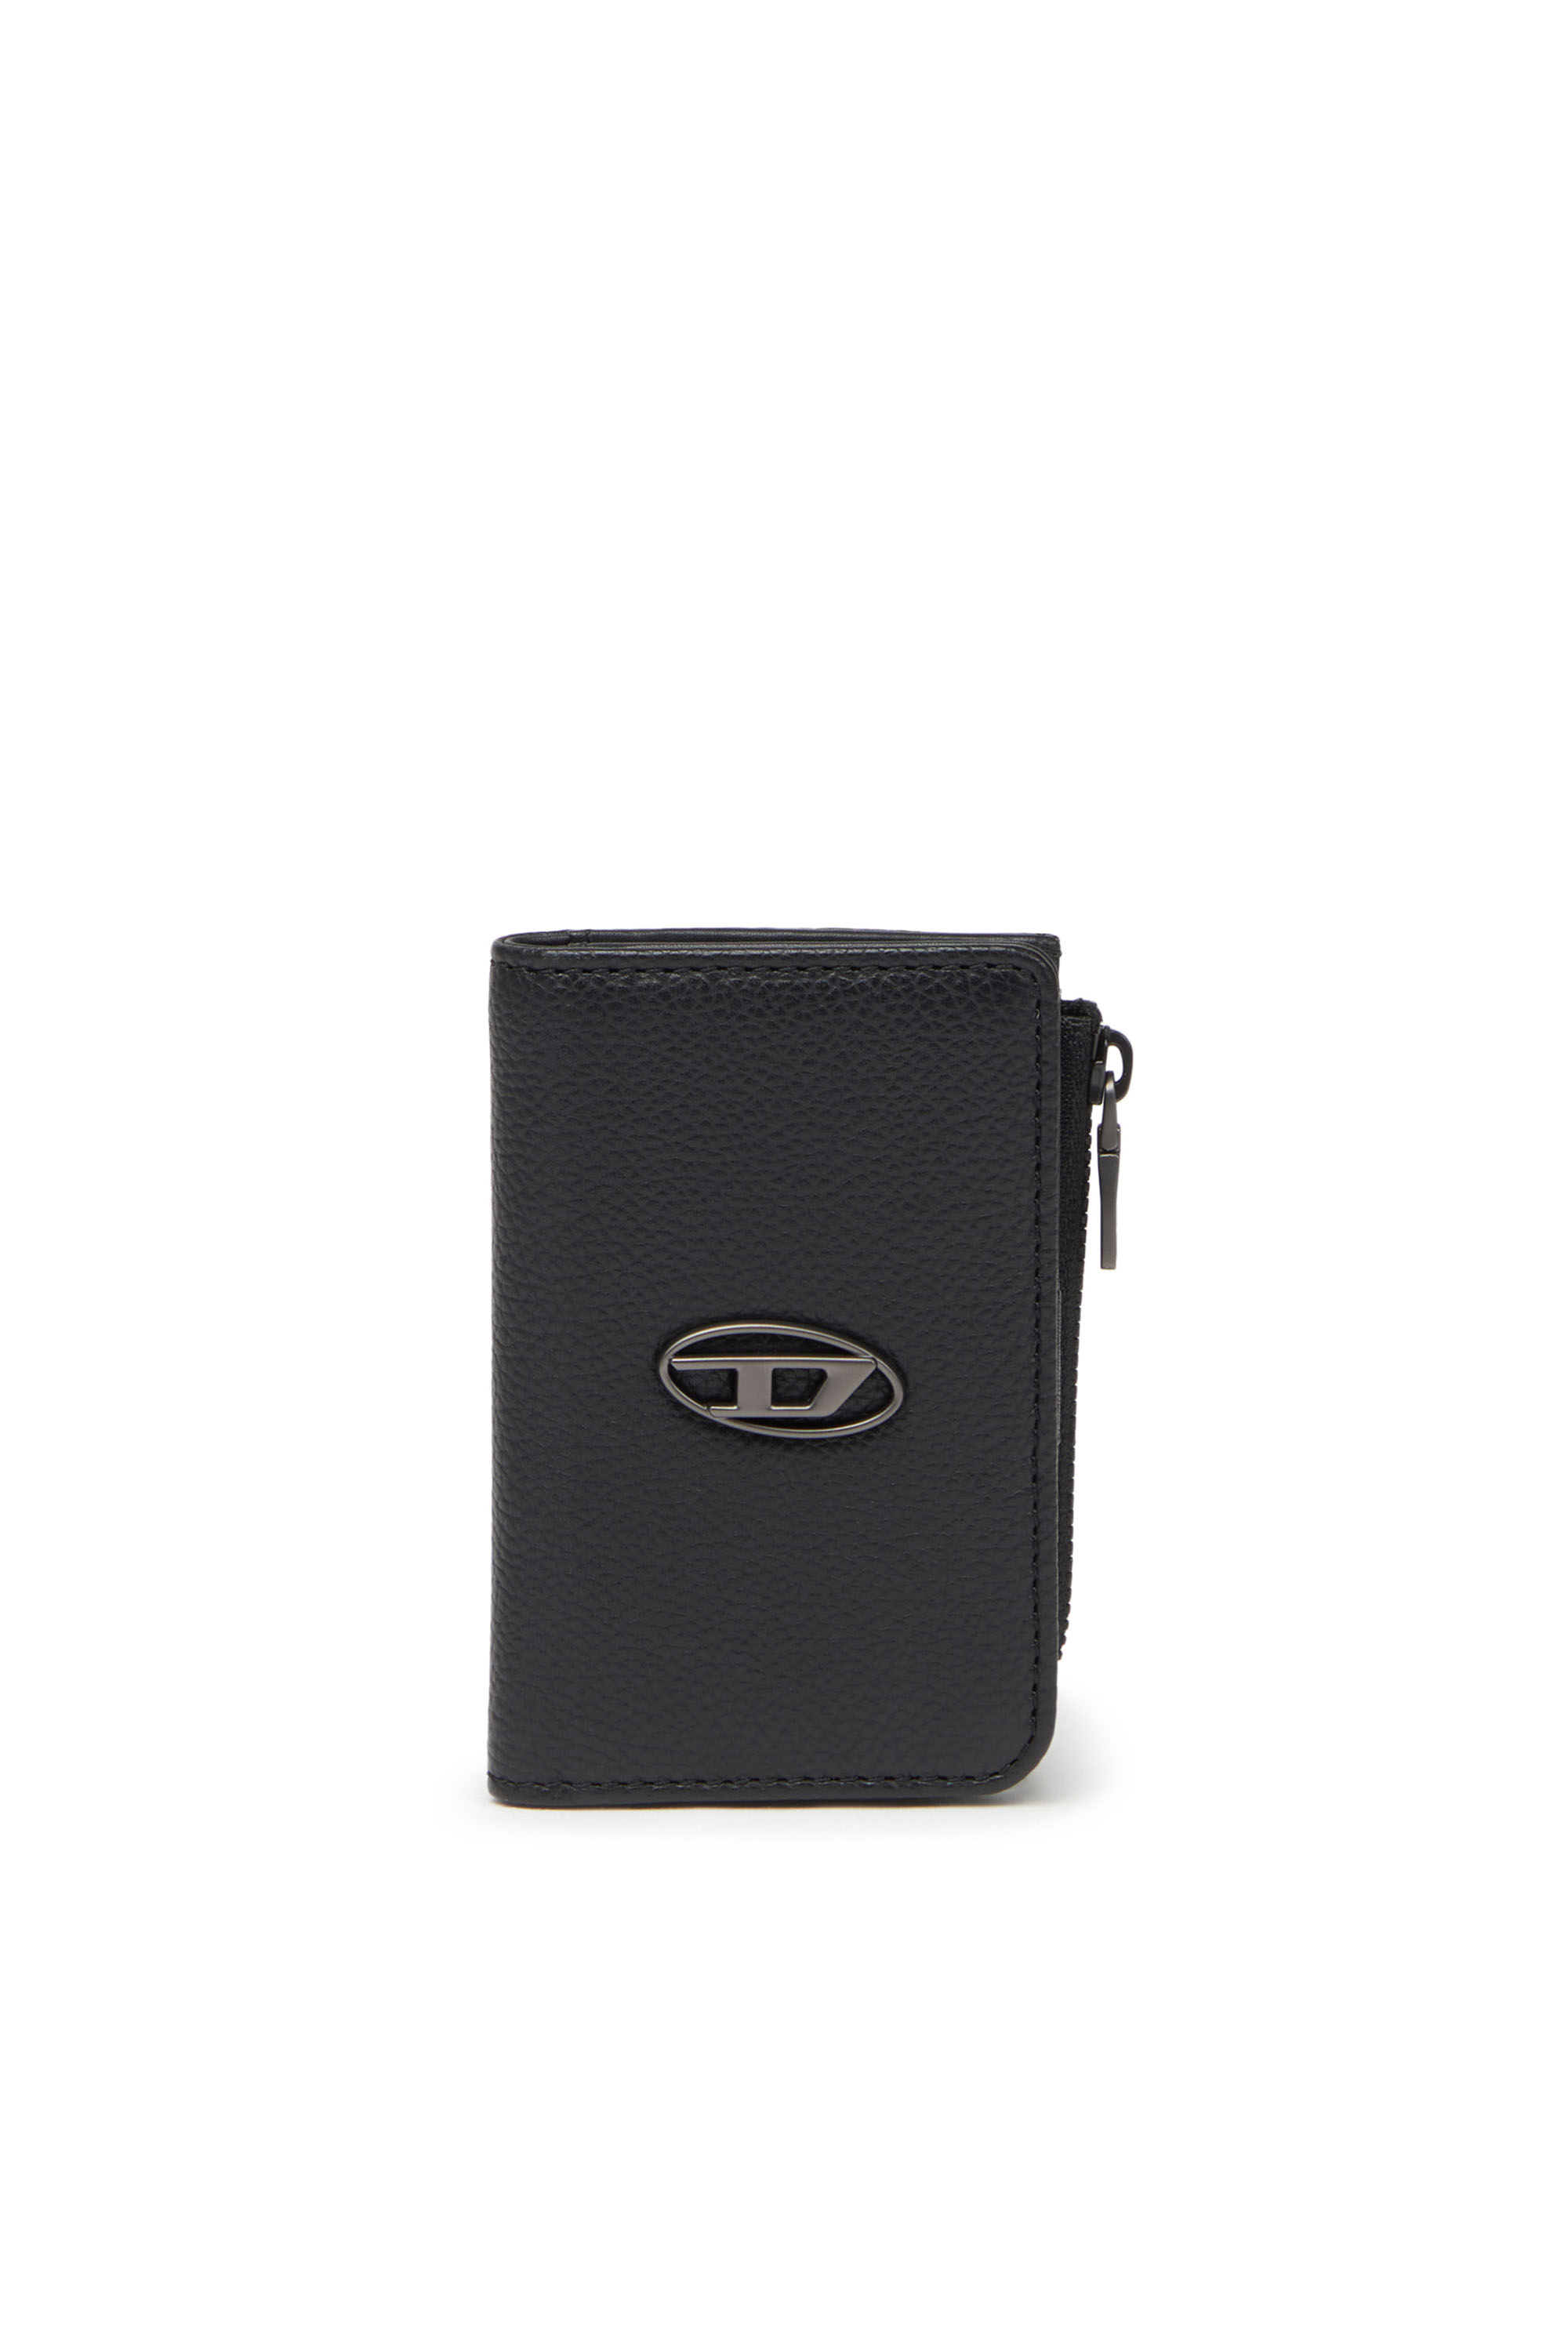 Diesel - Key case in grained leather - Bijoux and Gadgets - Man - Black